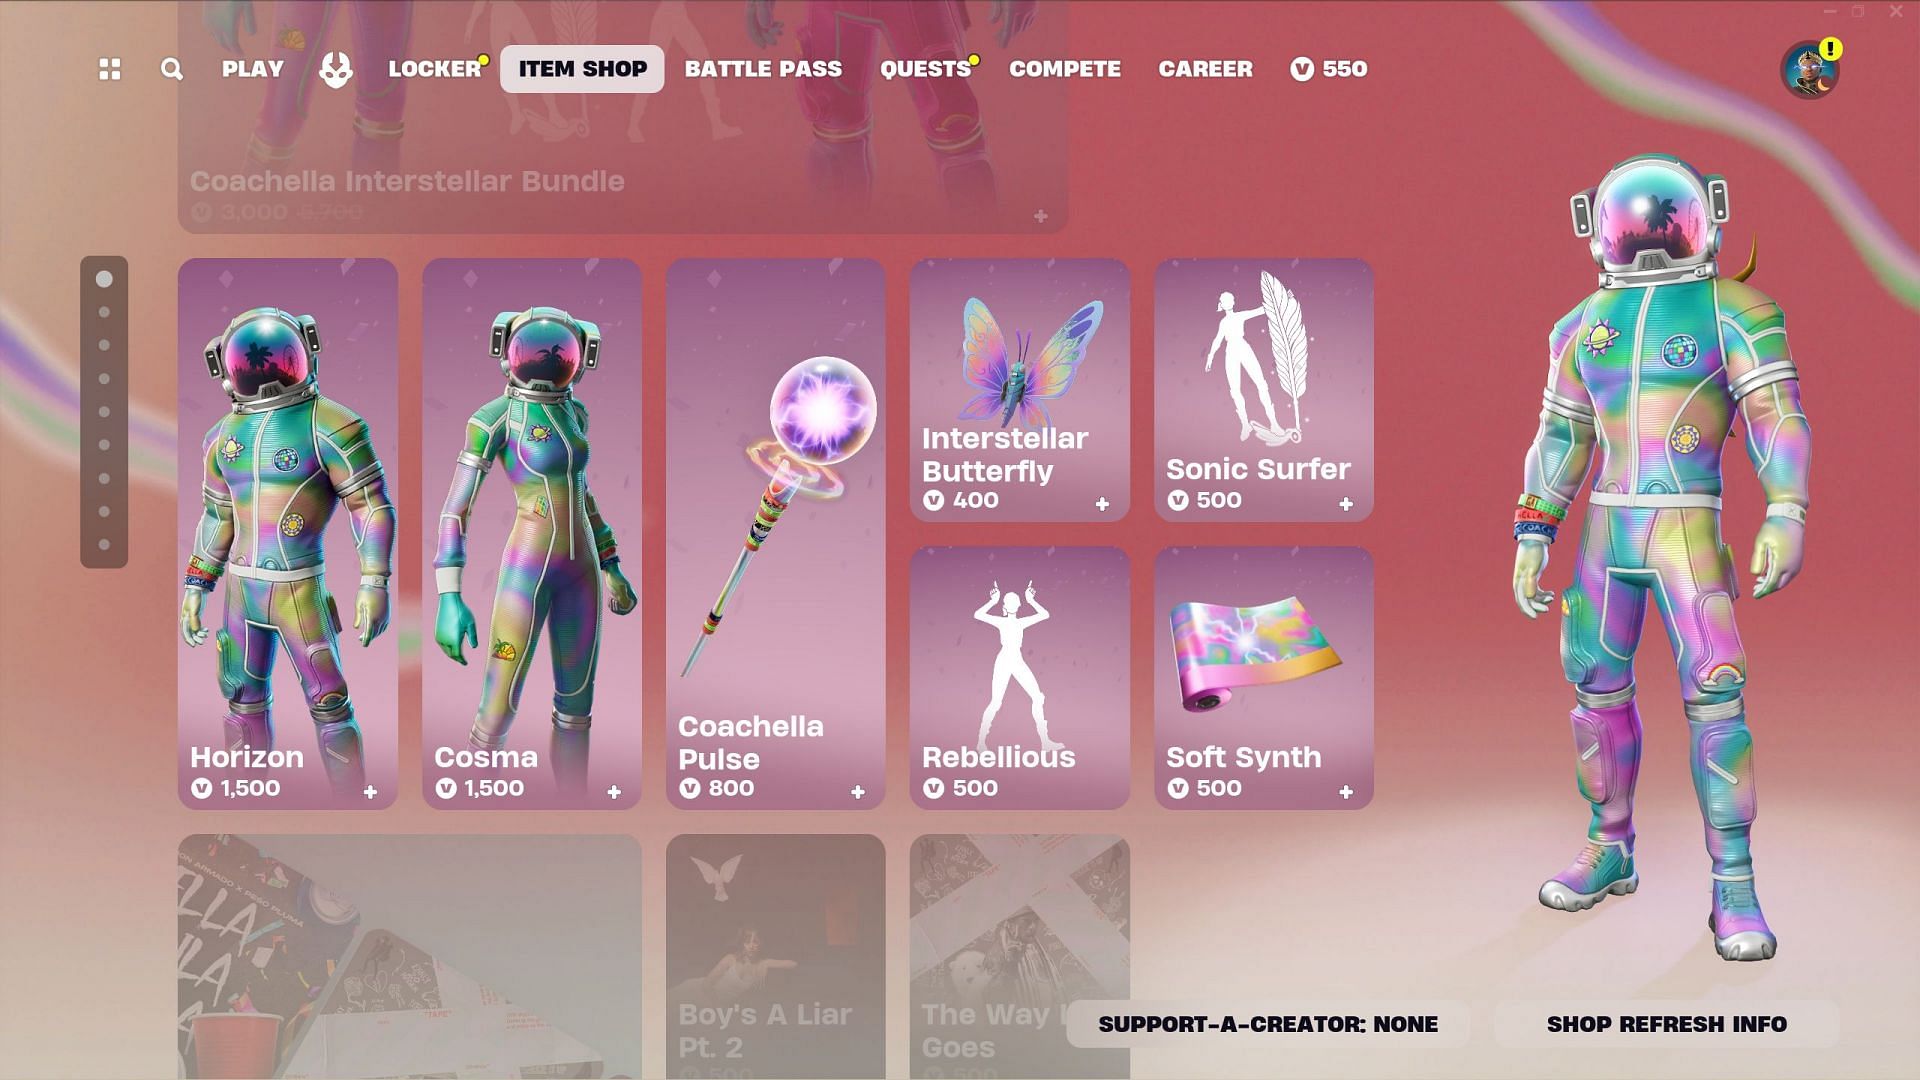 Coachella Interstellar Bundle is currently listed in the Item Shop (Image via Epic Games)